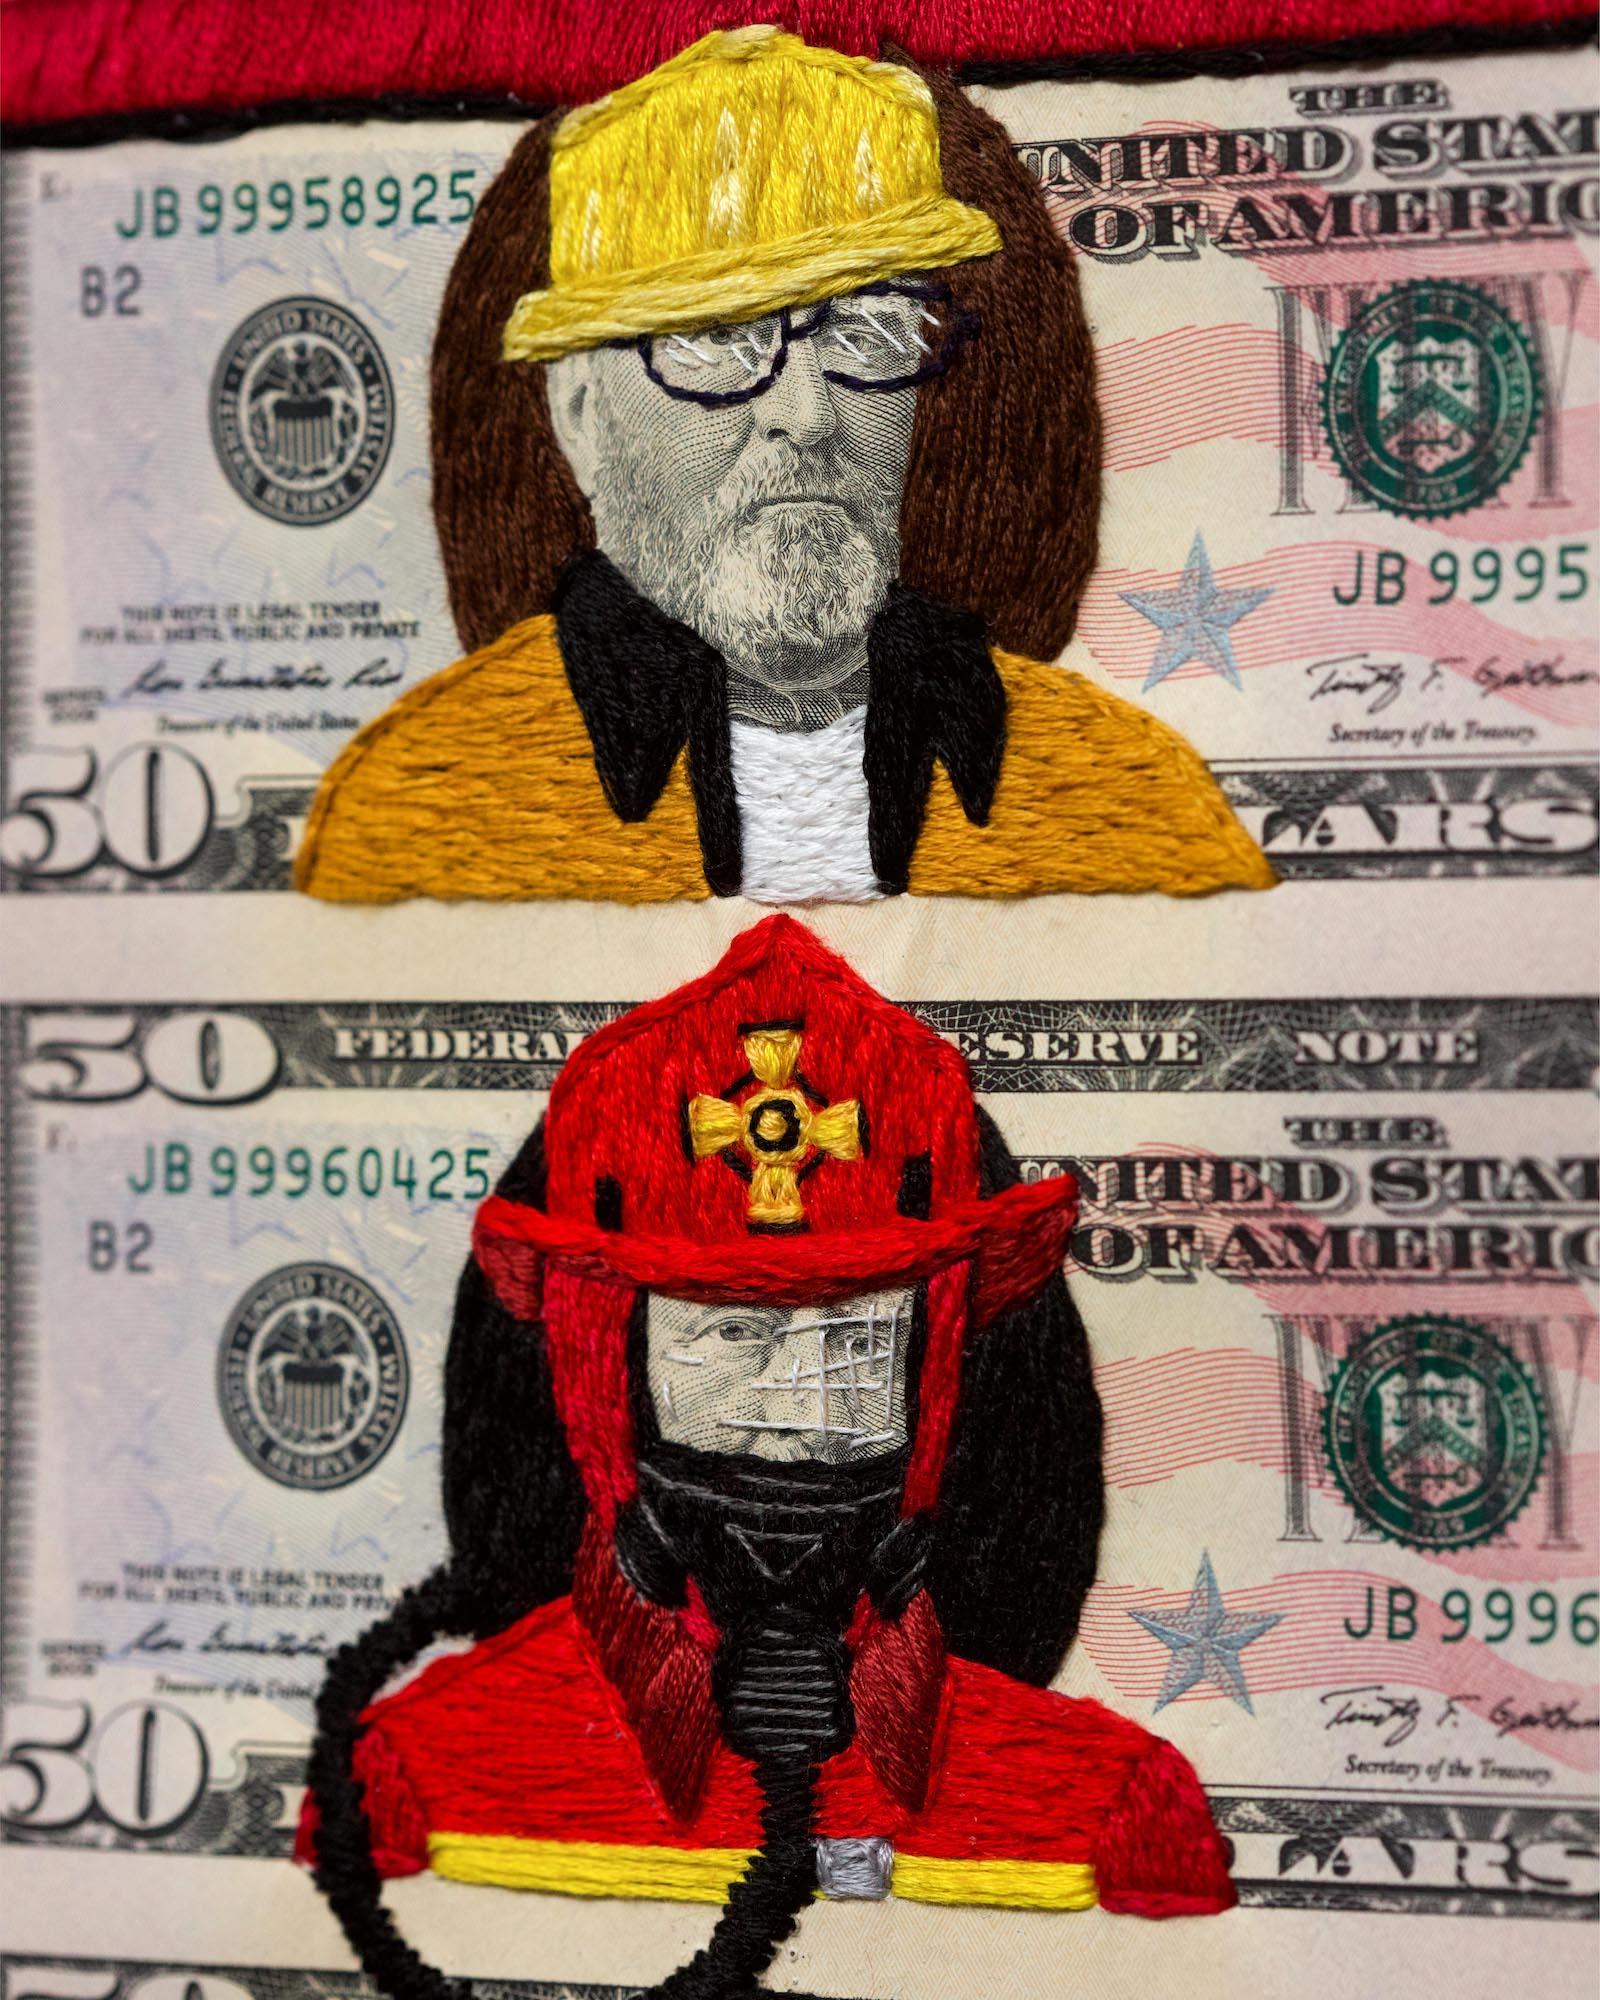 Stacey Lee Webber

We The People: Grant Firemen

27” x 18.5” Framed

hand stitched paper currency

2022